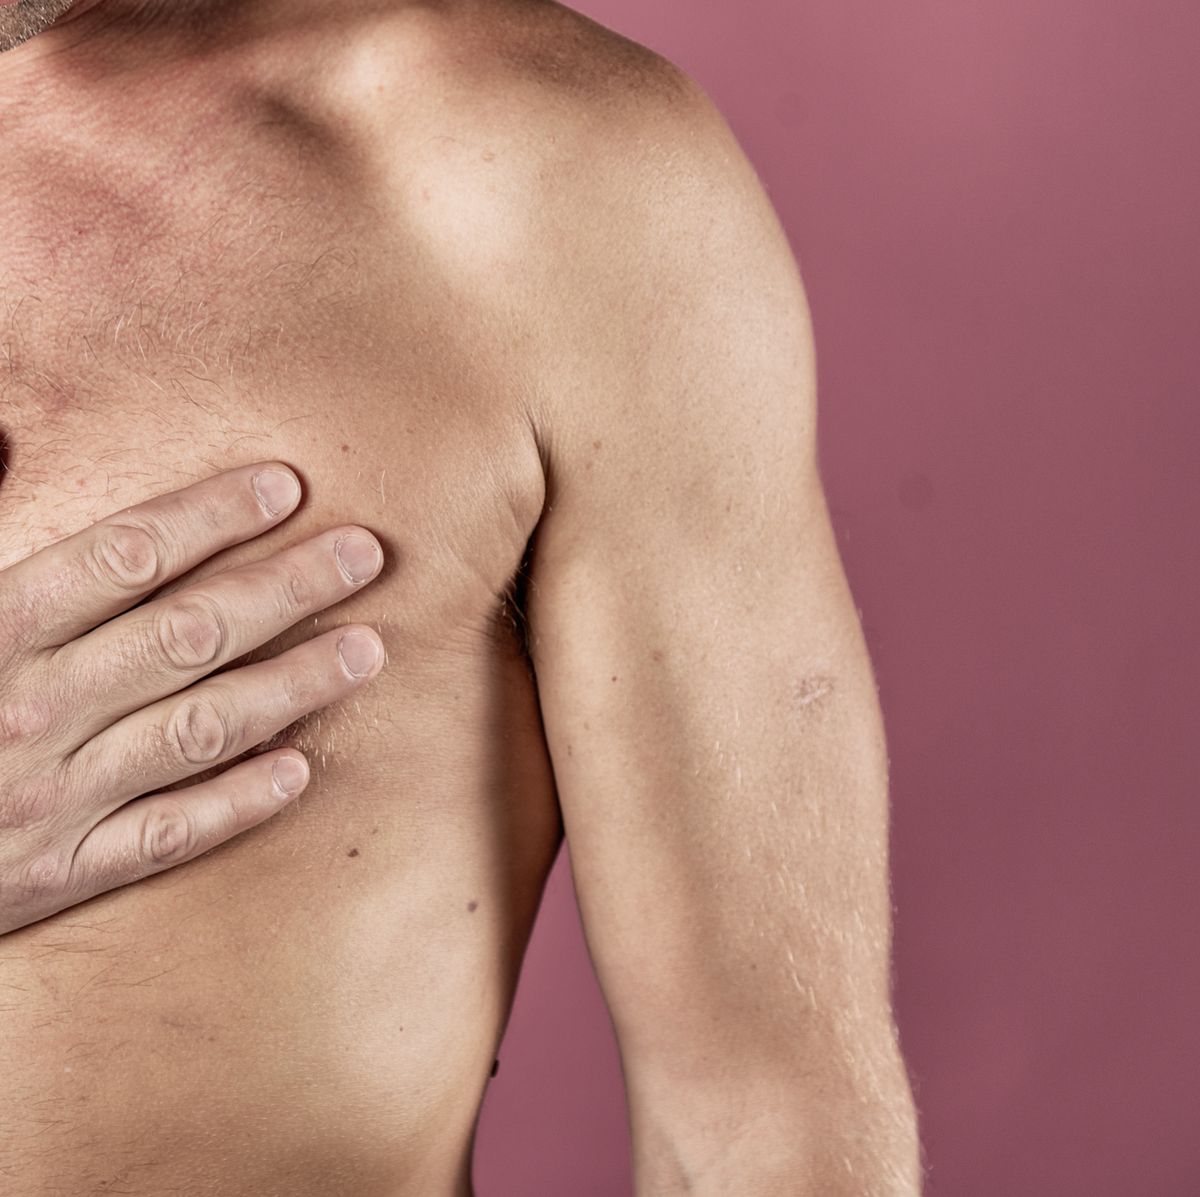 Sore nipples: cause and remedies